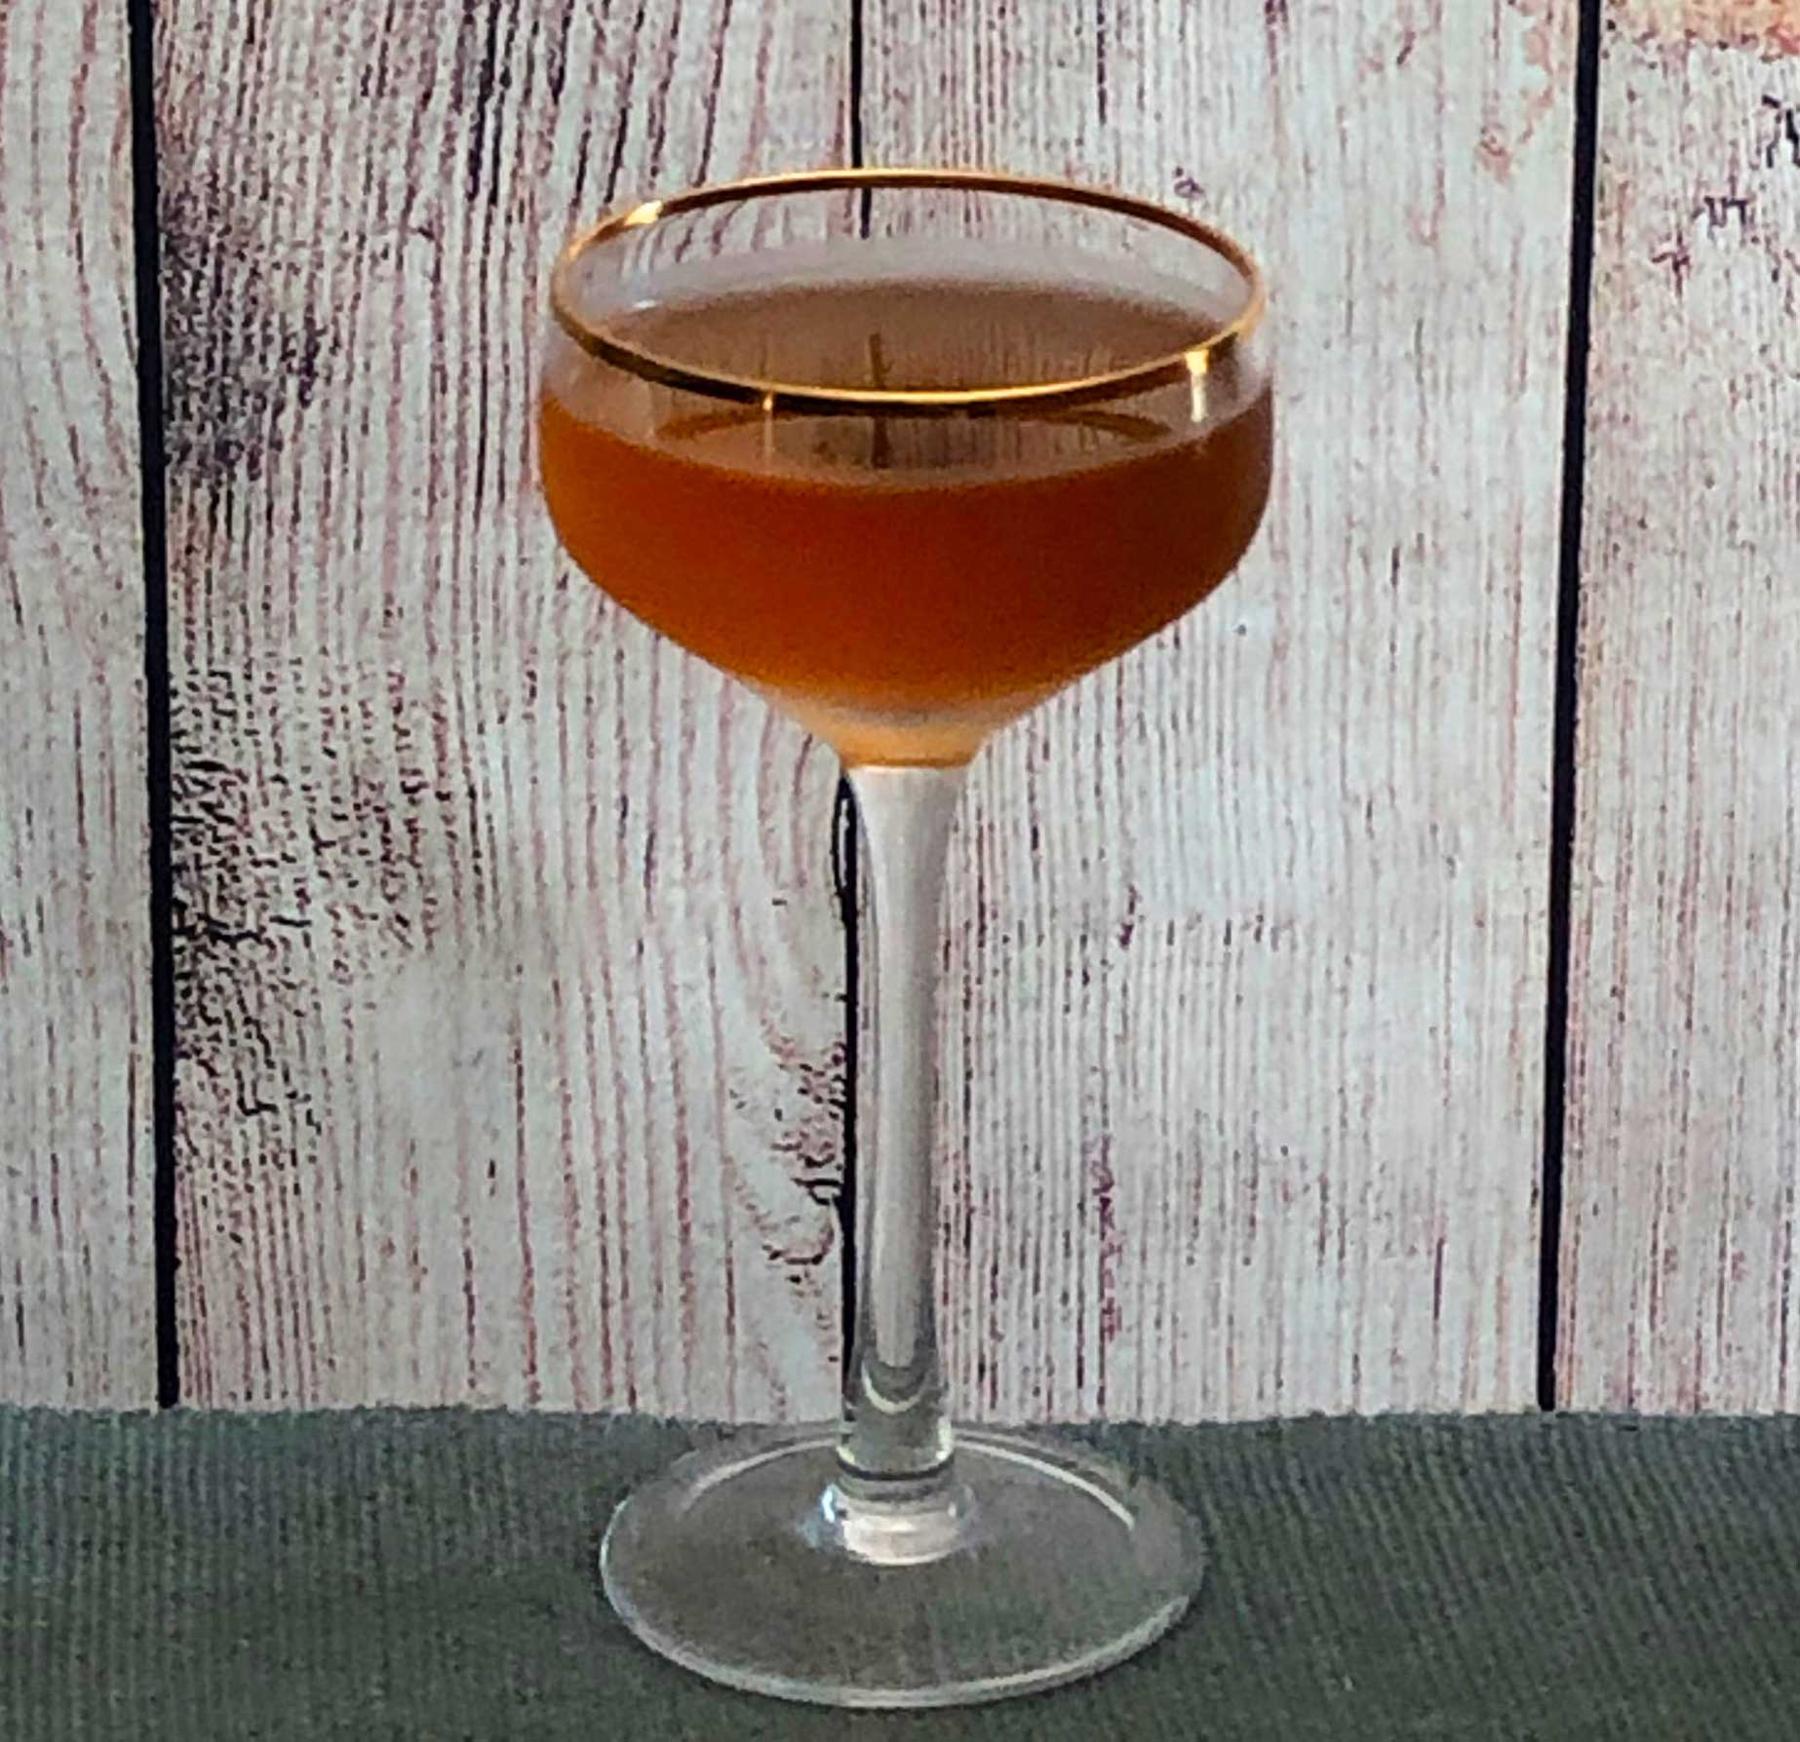 An example of the Club Cocktail, the mixed drink (drink), by The Only William, “Flowing Bowl”, featuring Hayman’s Old Tom Gin, Dolin Rouge Vermouth de Chambéry, simple syrup, Dolin Génépy le Chamois Liqueur, and orange bitters; photo by Lee Edwards